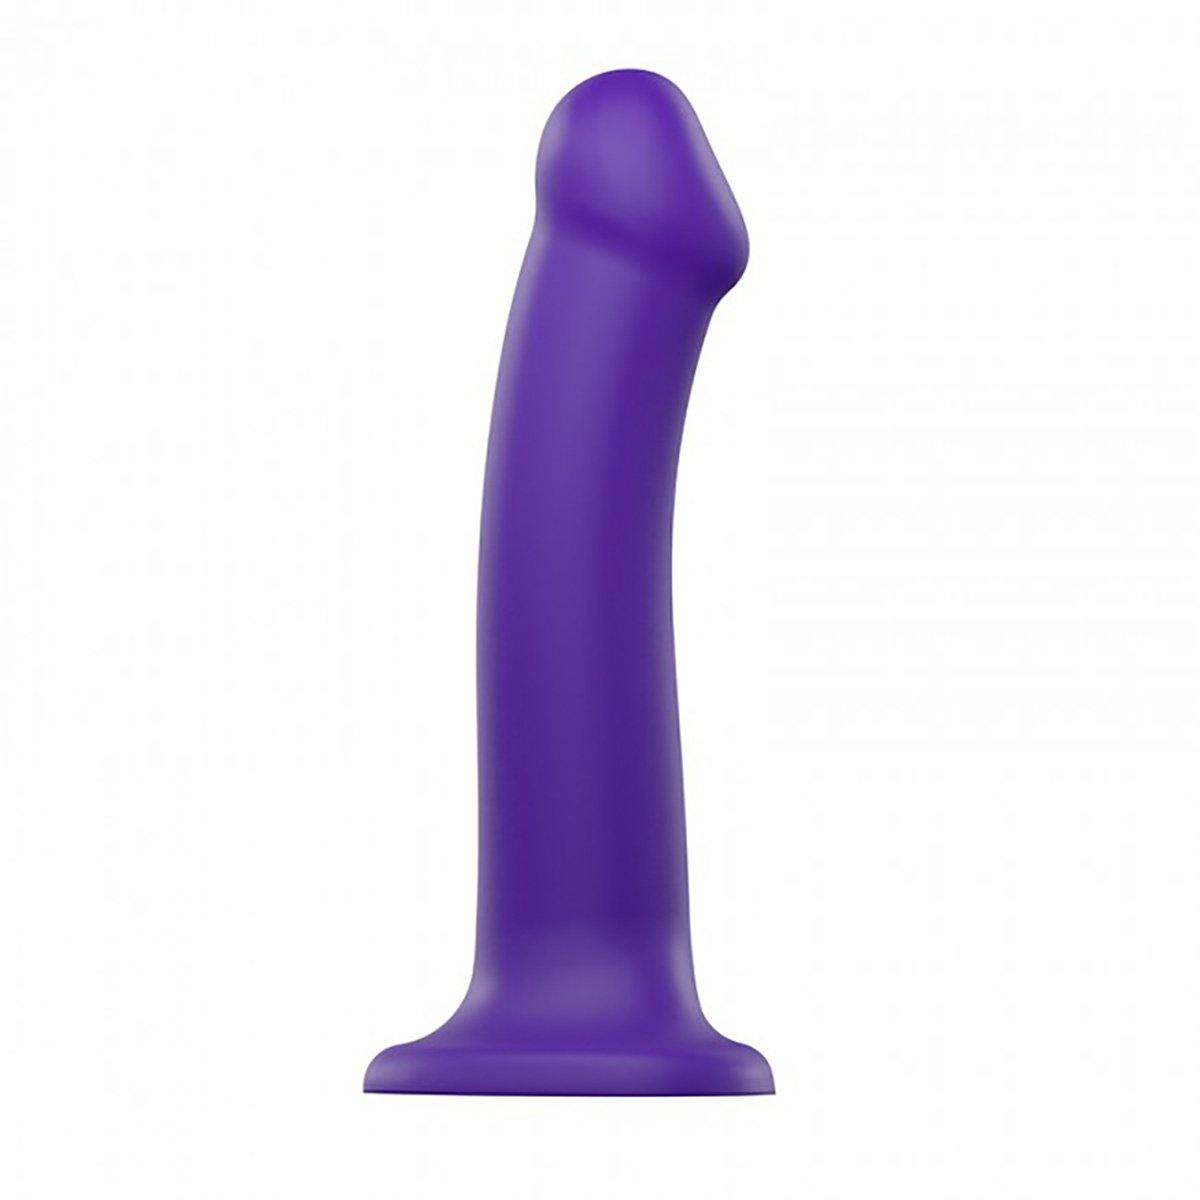 Strap-on-Me Bendable Dual Density Semi-Realistic Dil Purple Large - Buy At Luxury Toy X - Free 3-Day Shipping